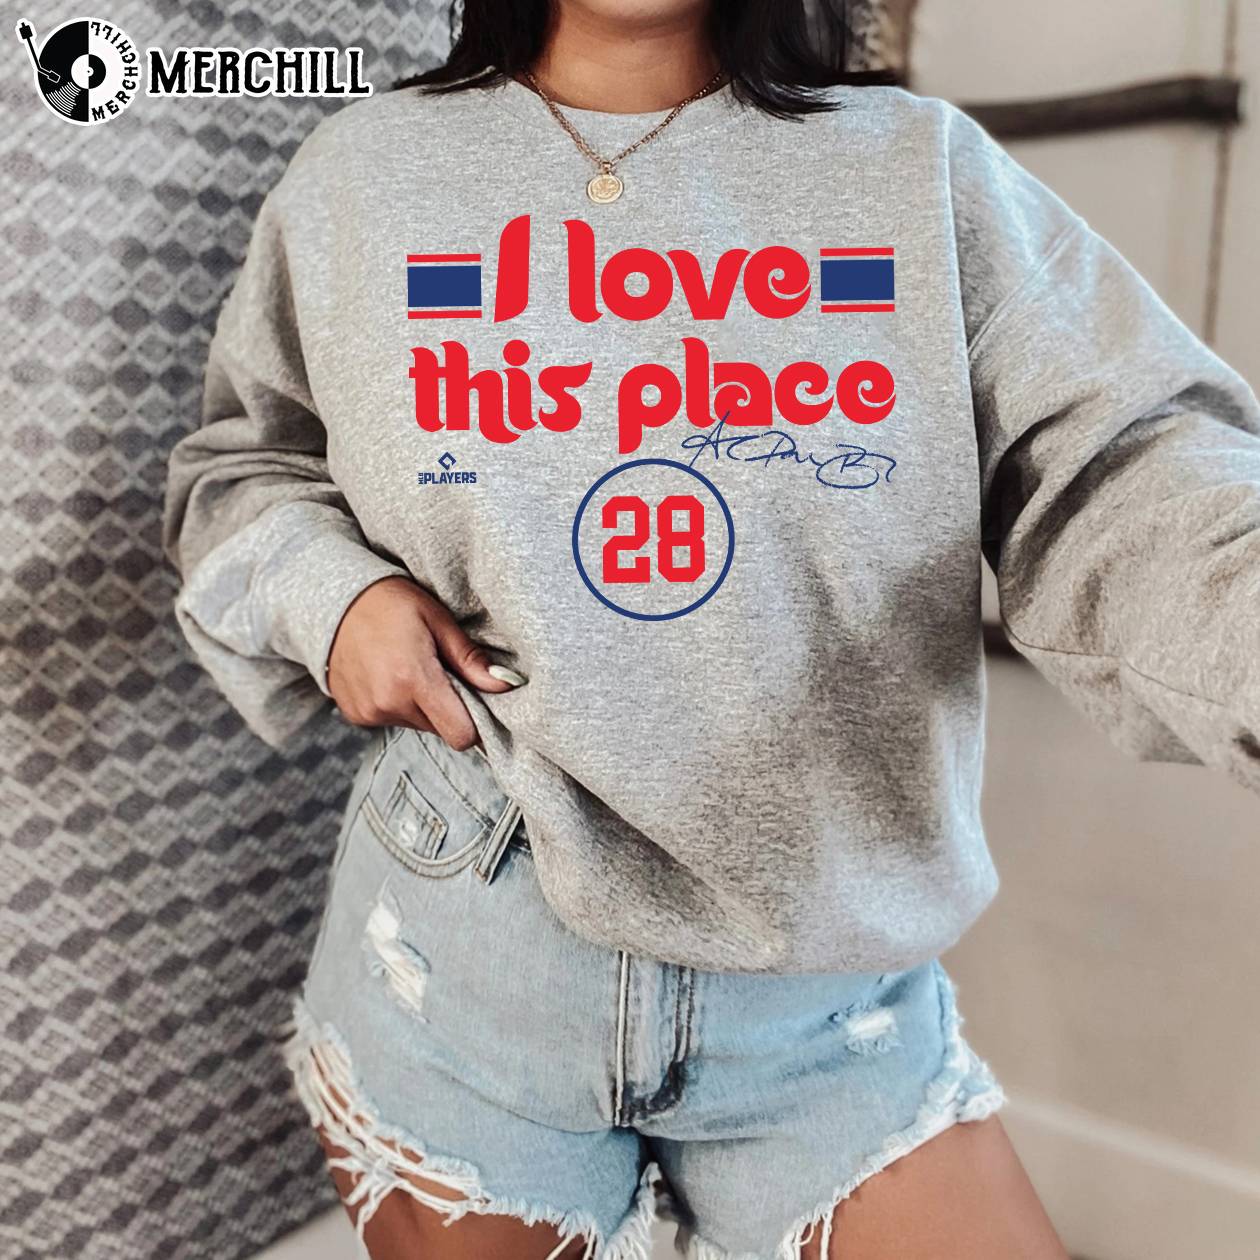 I Love This Place Shirt, Alec Bohm Shirt, Phillies Gifts for Her - Happy  Place for Music Lovers